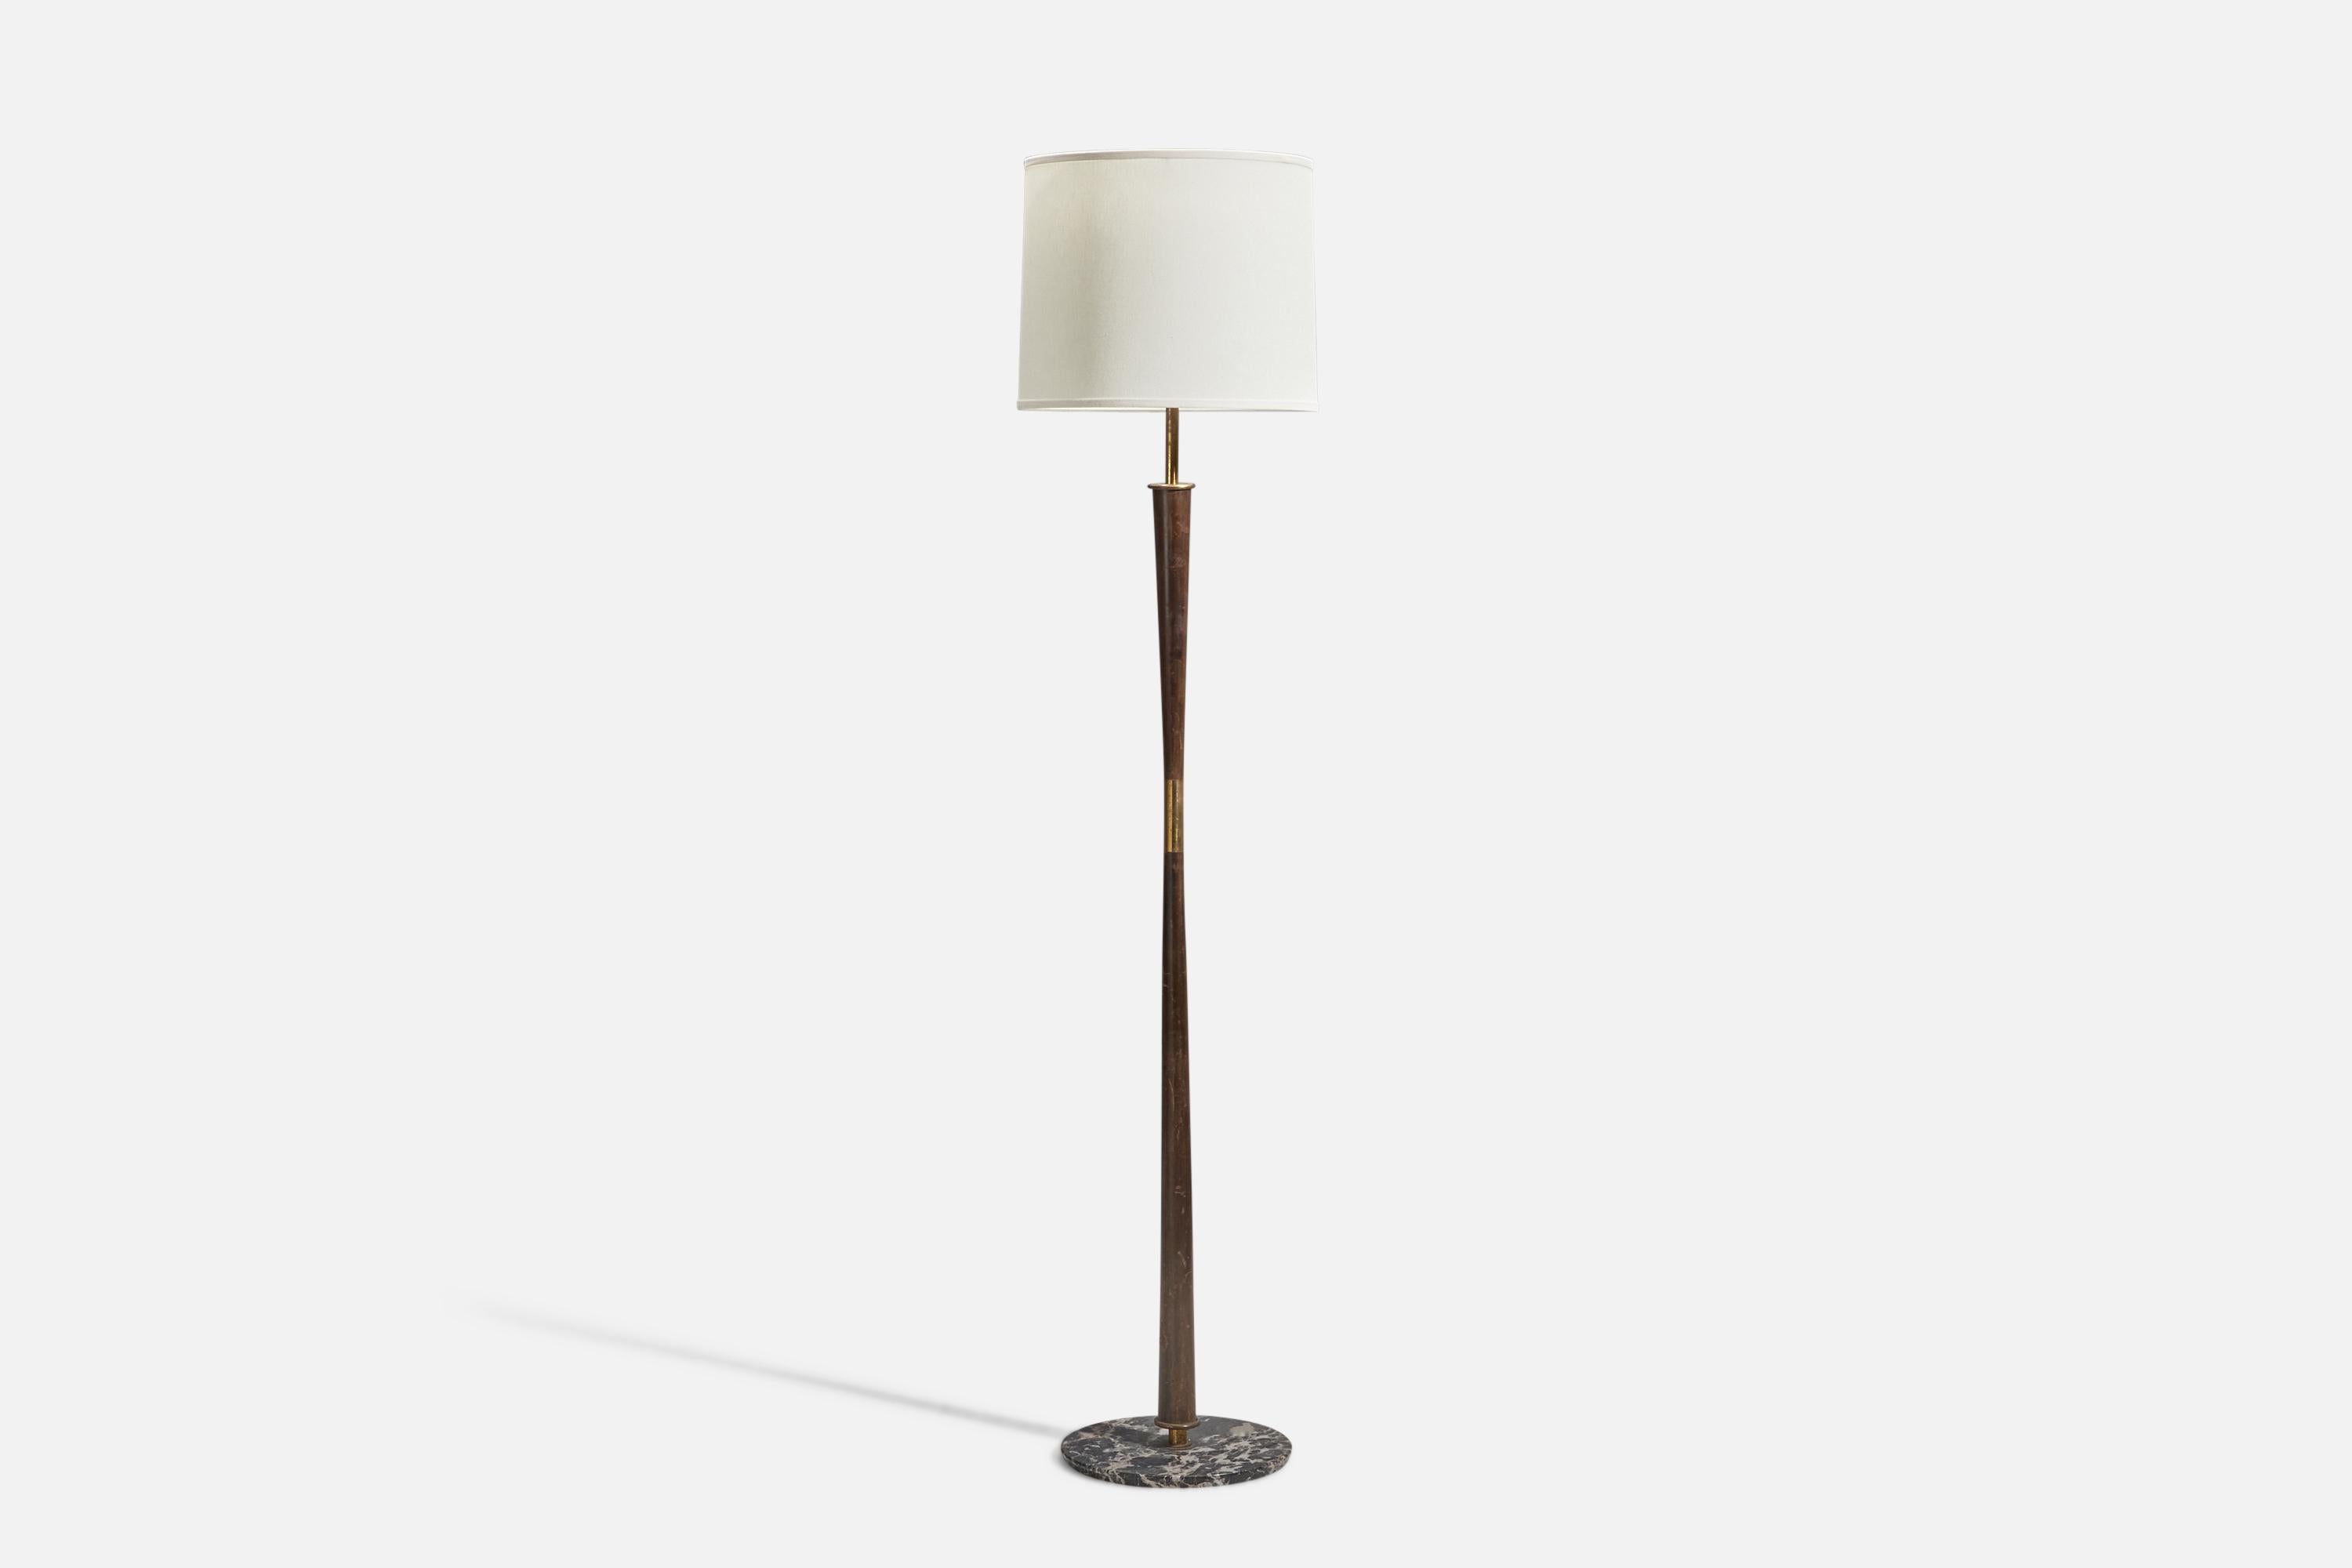 A brass, marble, wood and fabric floor lamp designed and produced by Stilnovo, Italy, 1950s.

Literature: Domus n. 244, March 1950, advertising

Sold with Lampshade. Dimensions stated are of Floor Lamp with Lampshade.

Sockets take standard E-26